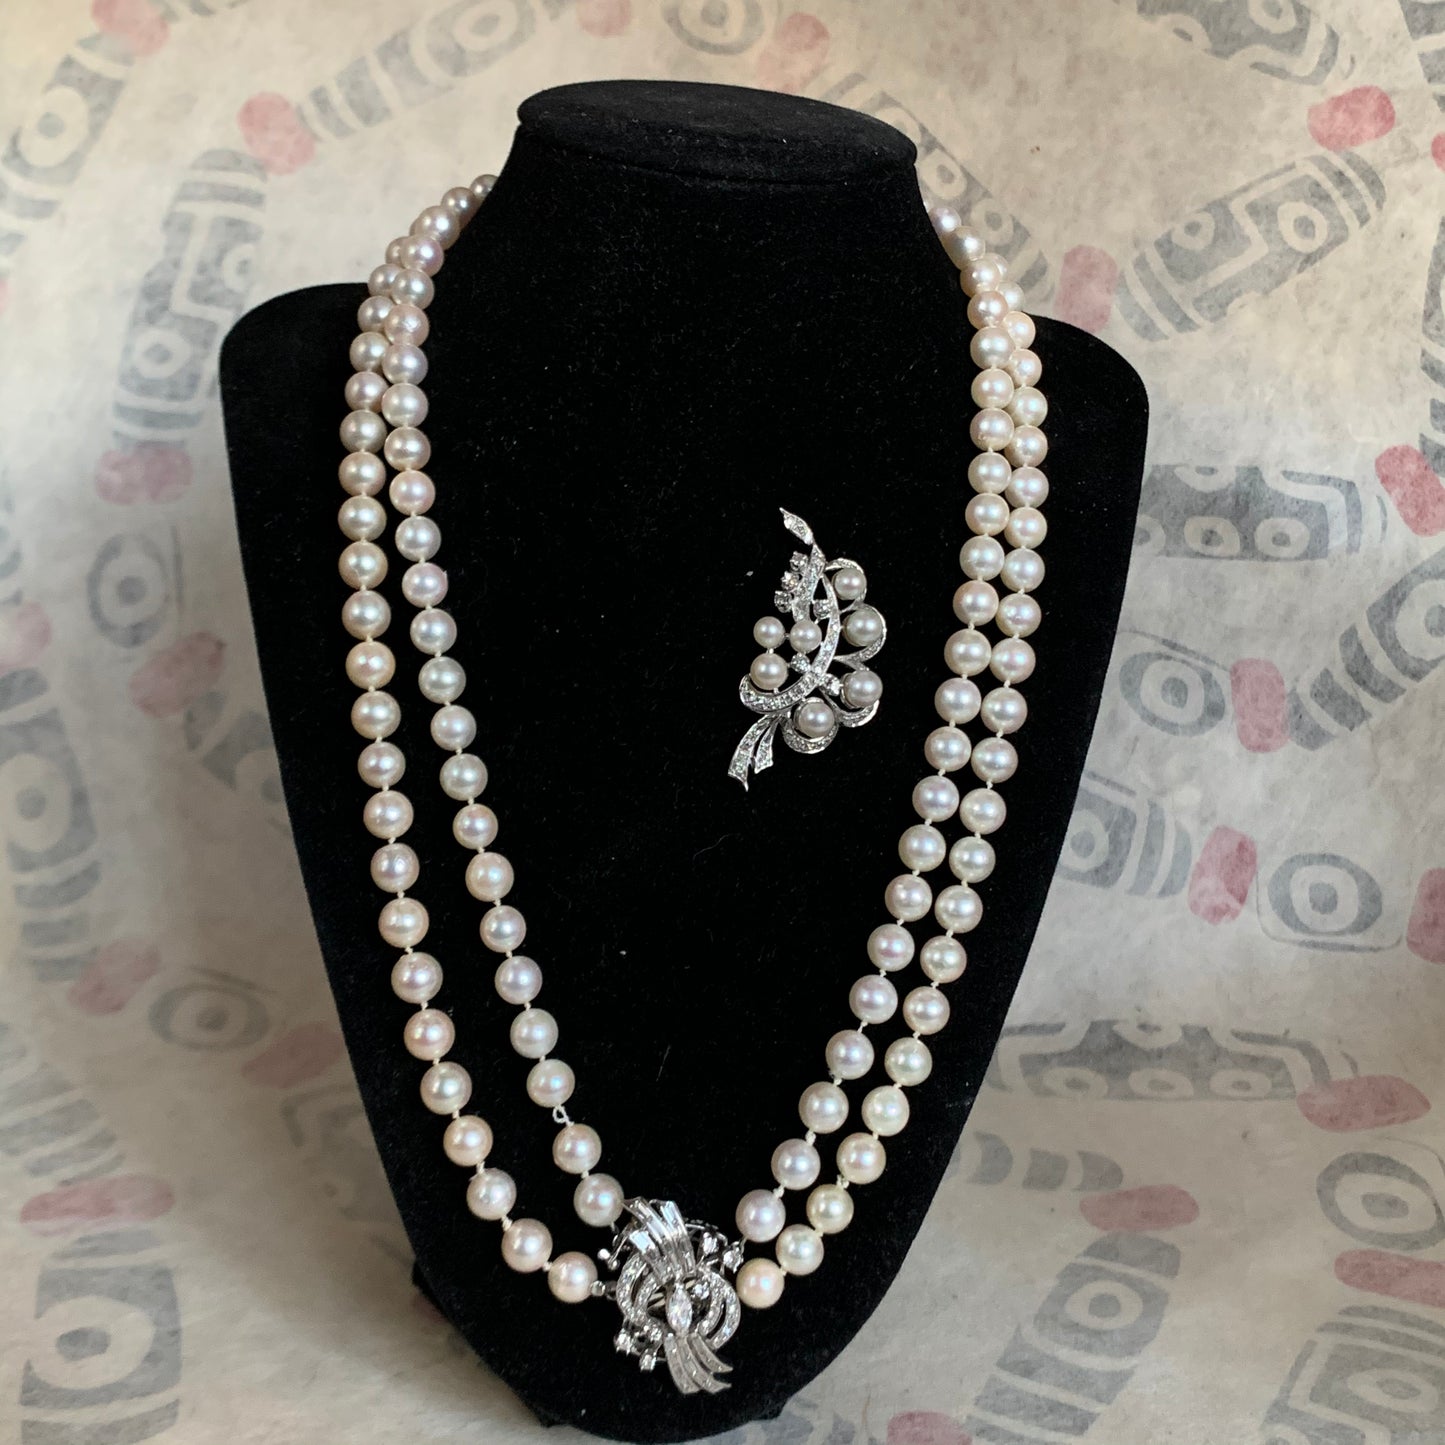 Pearl necklace with diamond clasp